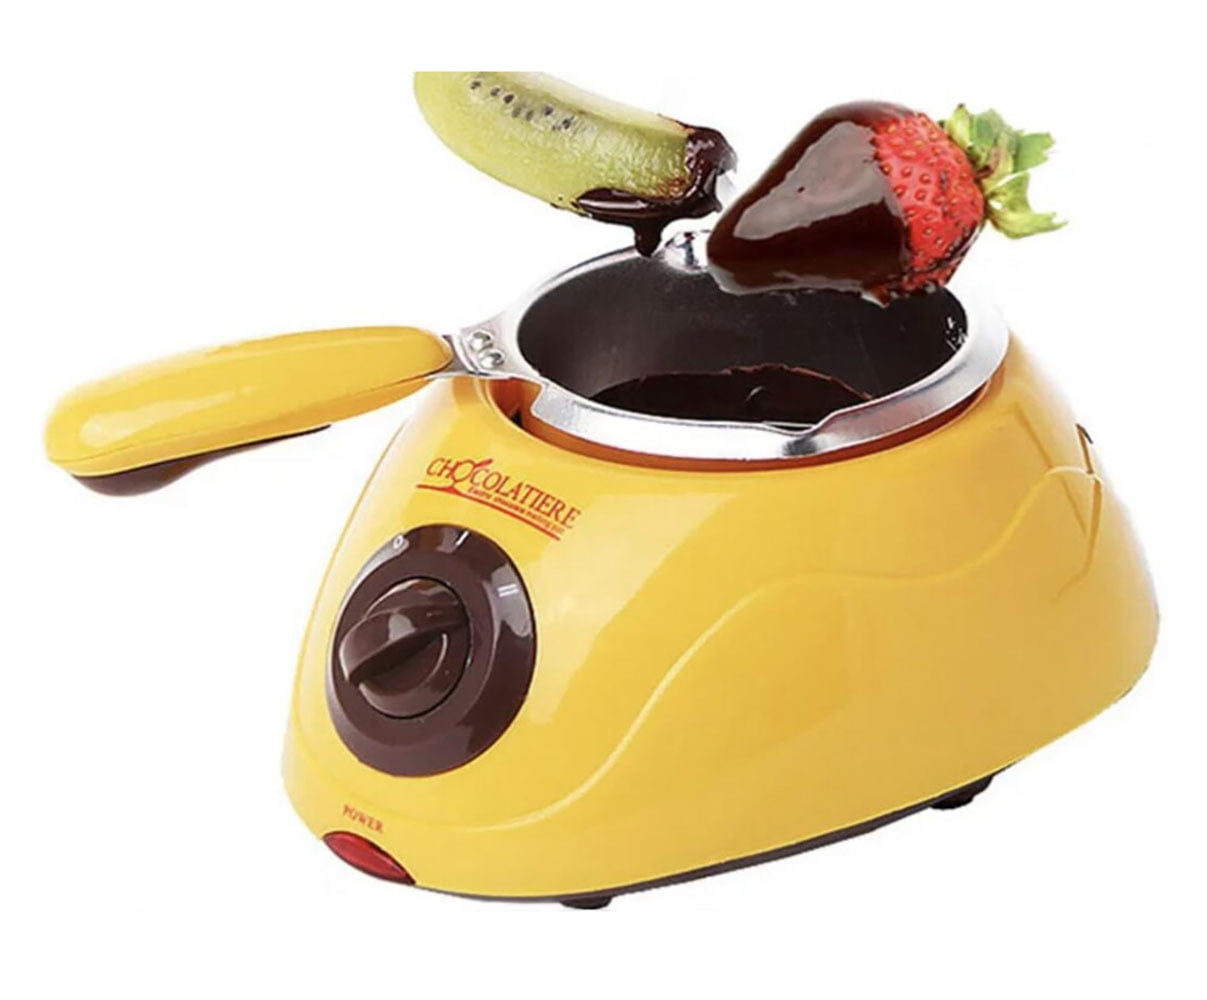 Candy Melts Chocolate Chocolate Melting Pot，Chocolate Melting Warming Fondue Set，Electric Choco Melt/Warmer Machine Set with Keep Warm Dipping function and Removable Pot Butter Caramel Cheese